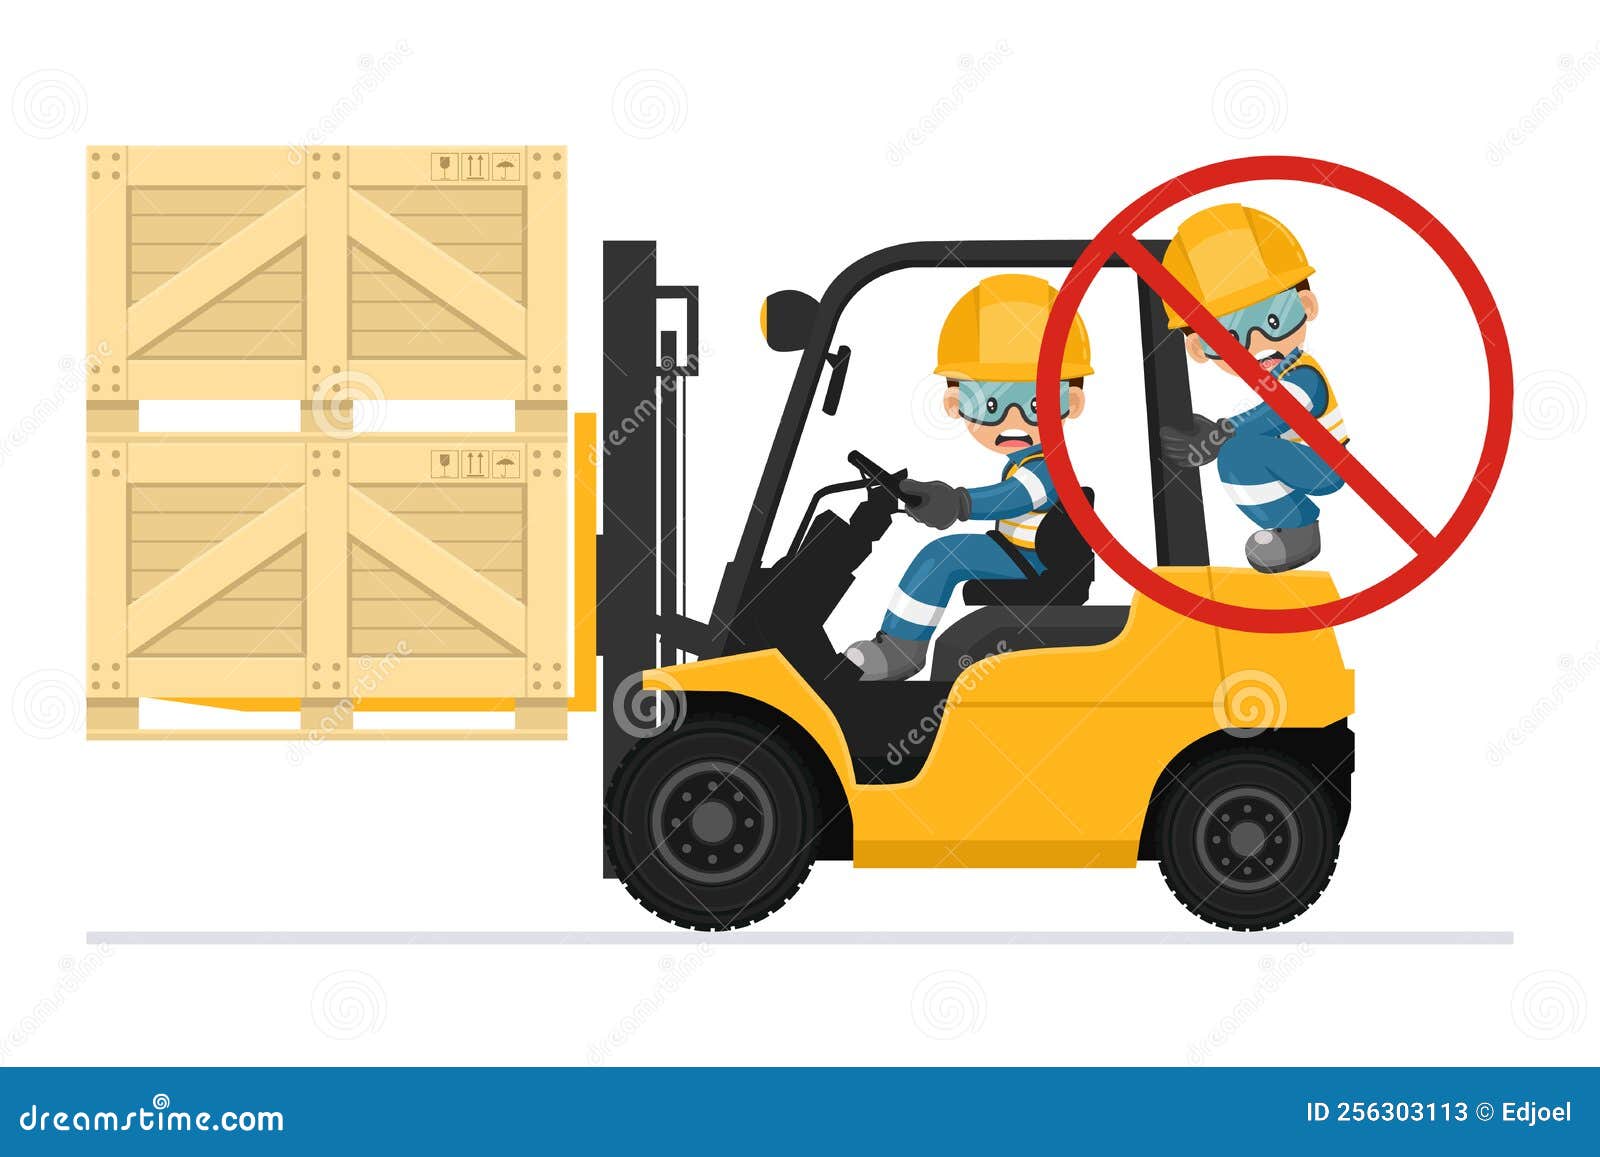 Transporting people on the forklift is prohibited. Fork lift truck transporting a wooden box packing pallet. Work accident in a warehouse. Security First. Industrial Safety and Occupational Health vector